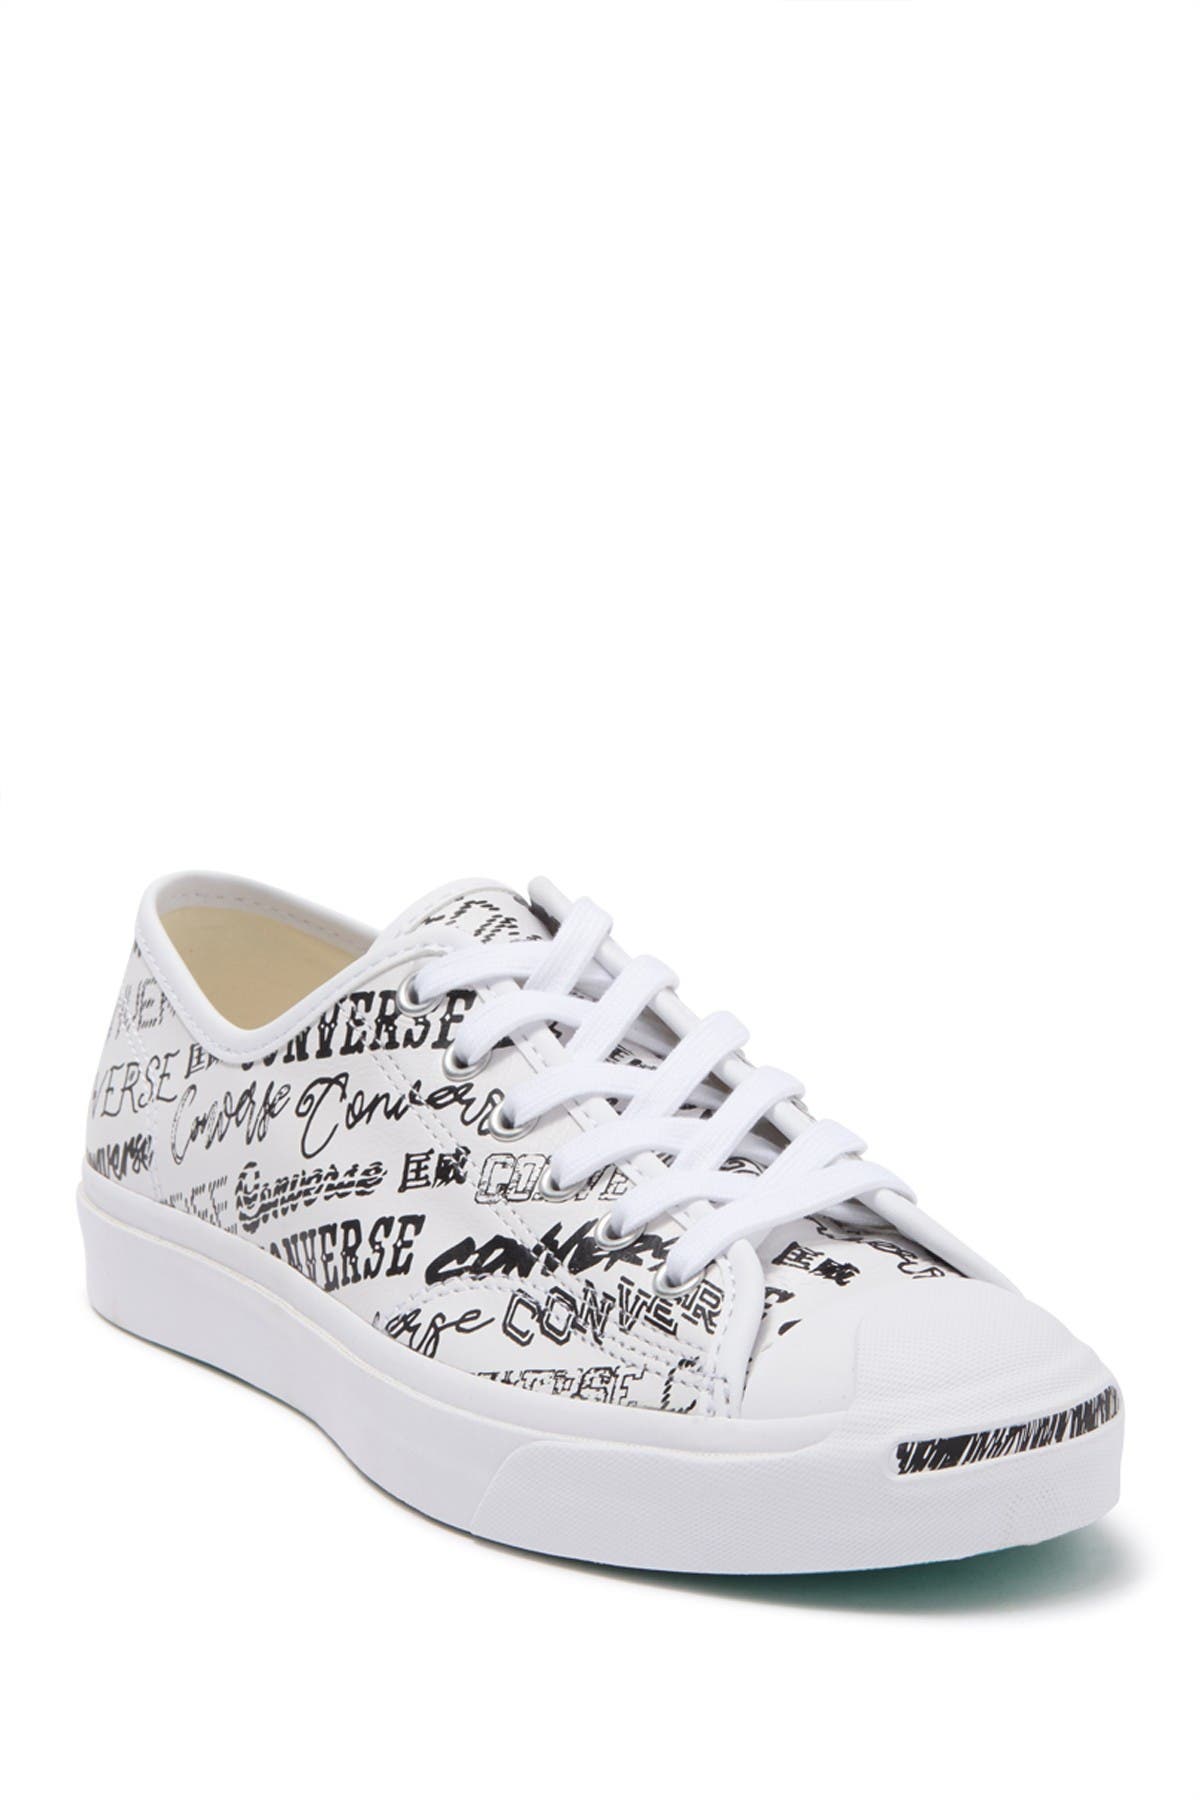 converse jack purcell nordstrom